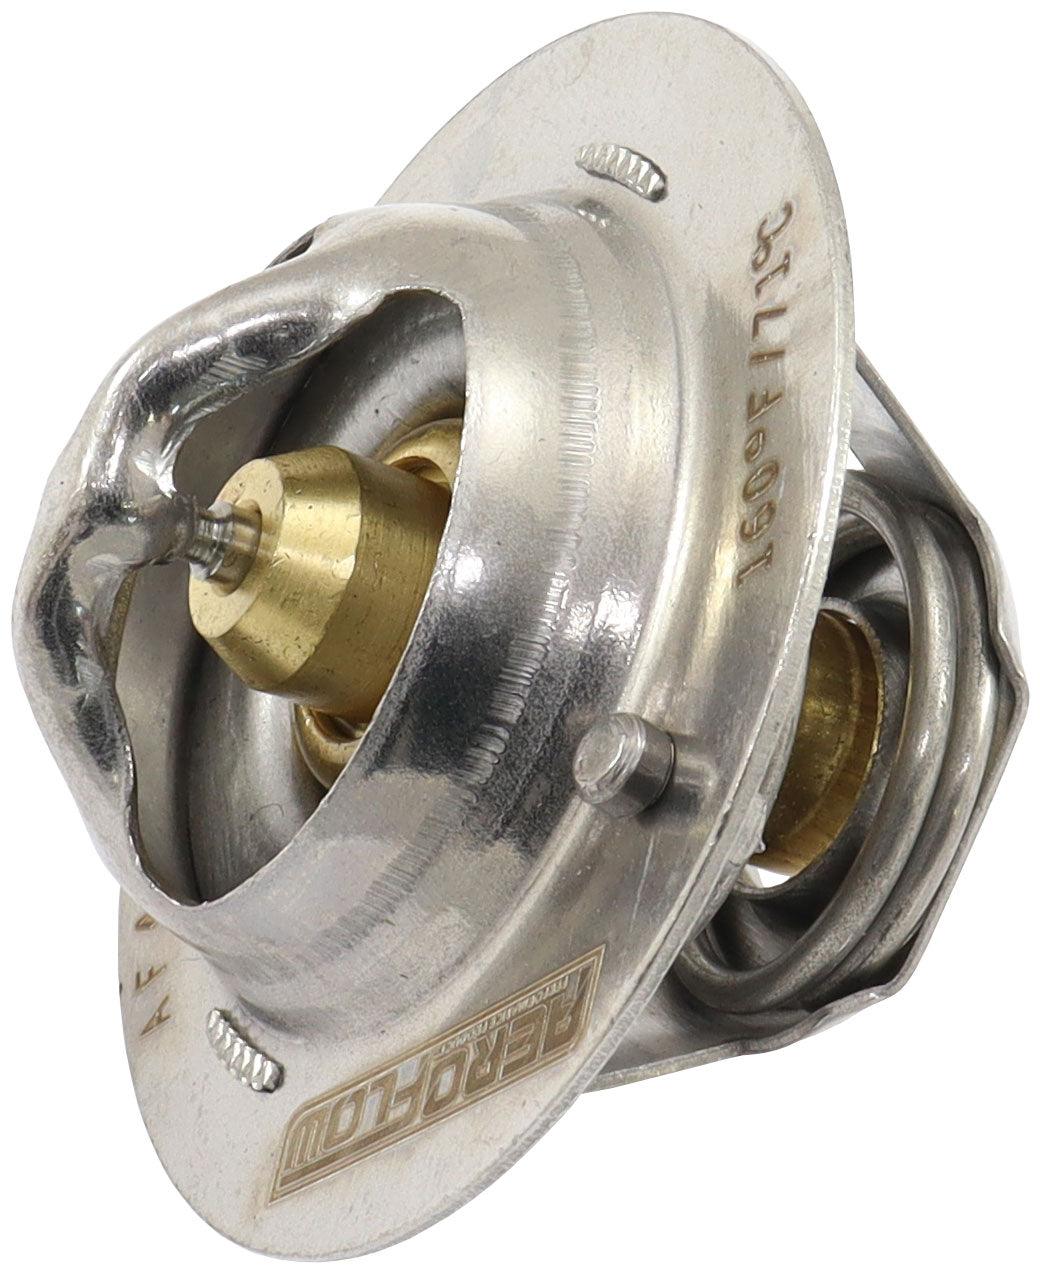 Aeroflow Subaru EJ20 & EJ25 Hi-Flow Thermostat, 160°F (71°C) 160°F Opening Temperature Rating, Made From Copper/Steel AF49-1136 - Prolink Performance